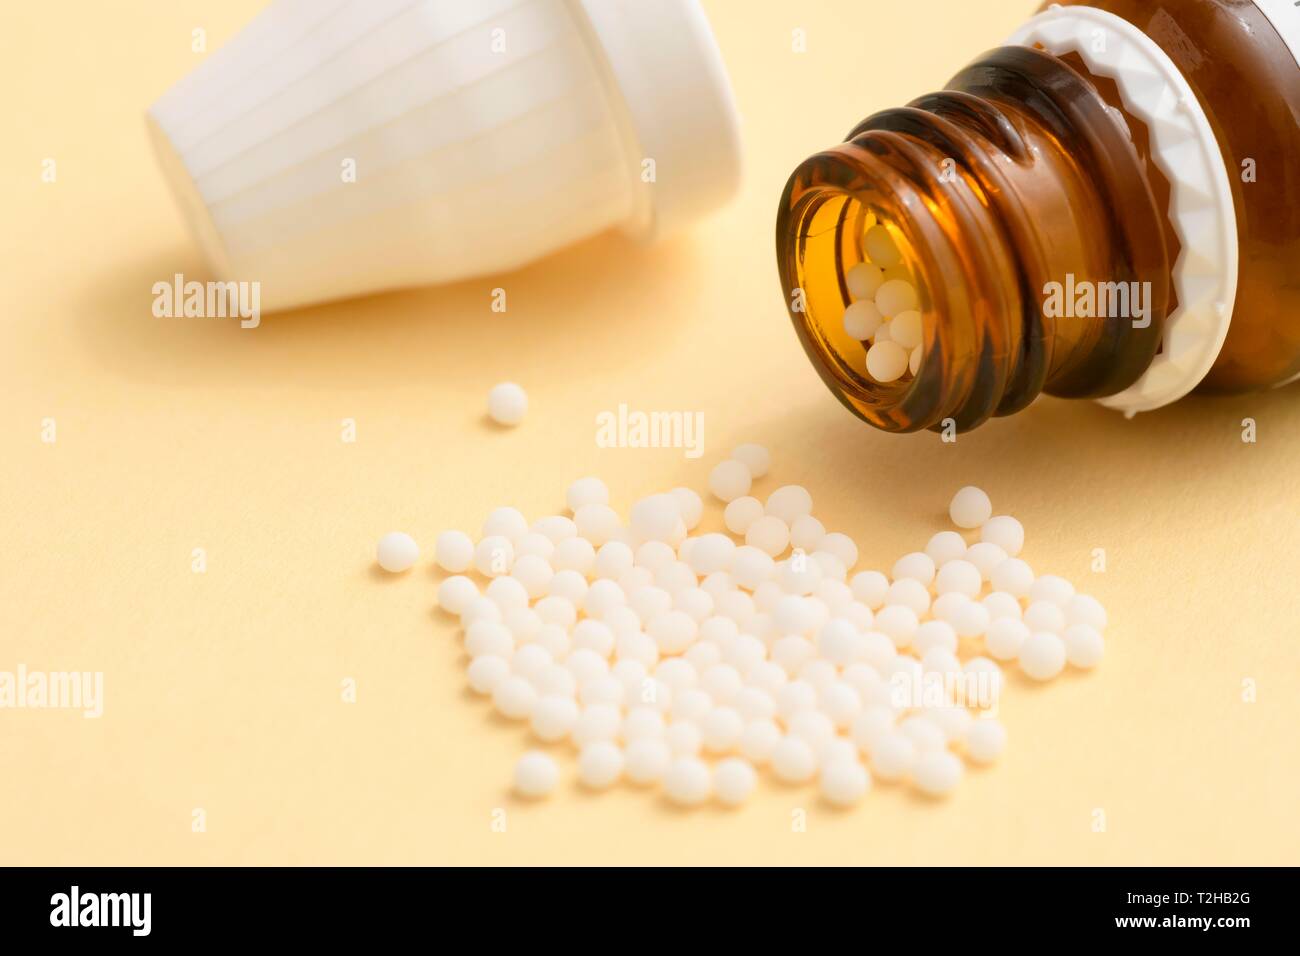 Globules in a pile with bottle, Homeopathy, Germany Stock Photo